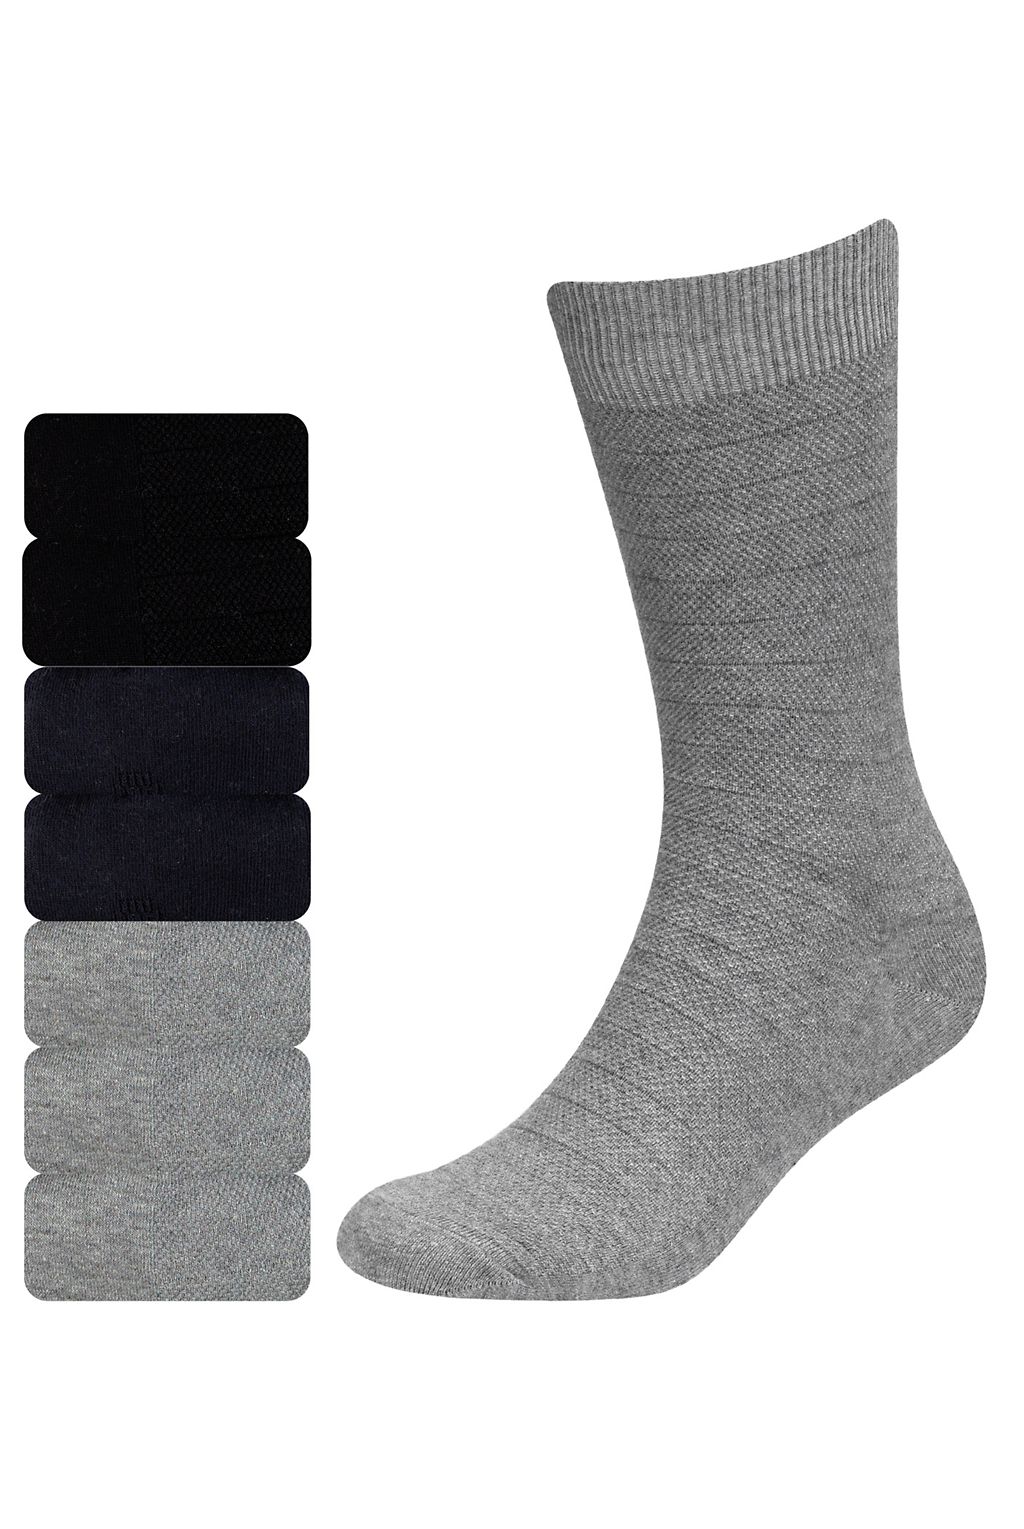 7 Pairs of Freshfeet™ Cotton Rich Piqué Socks with Silver Technology 1 of 1